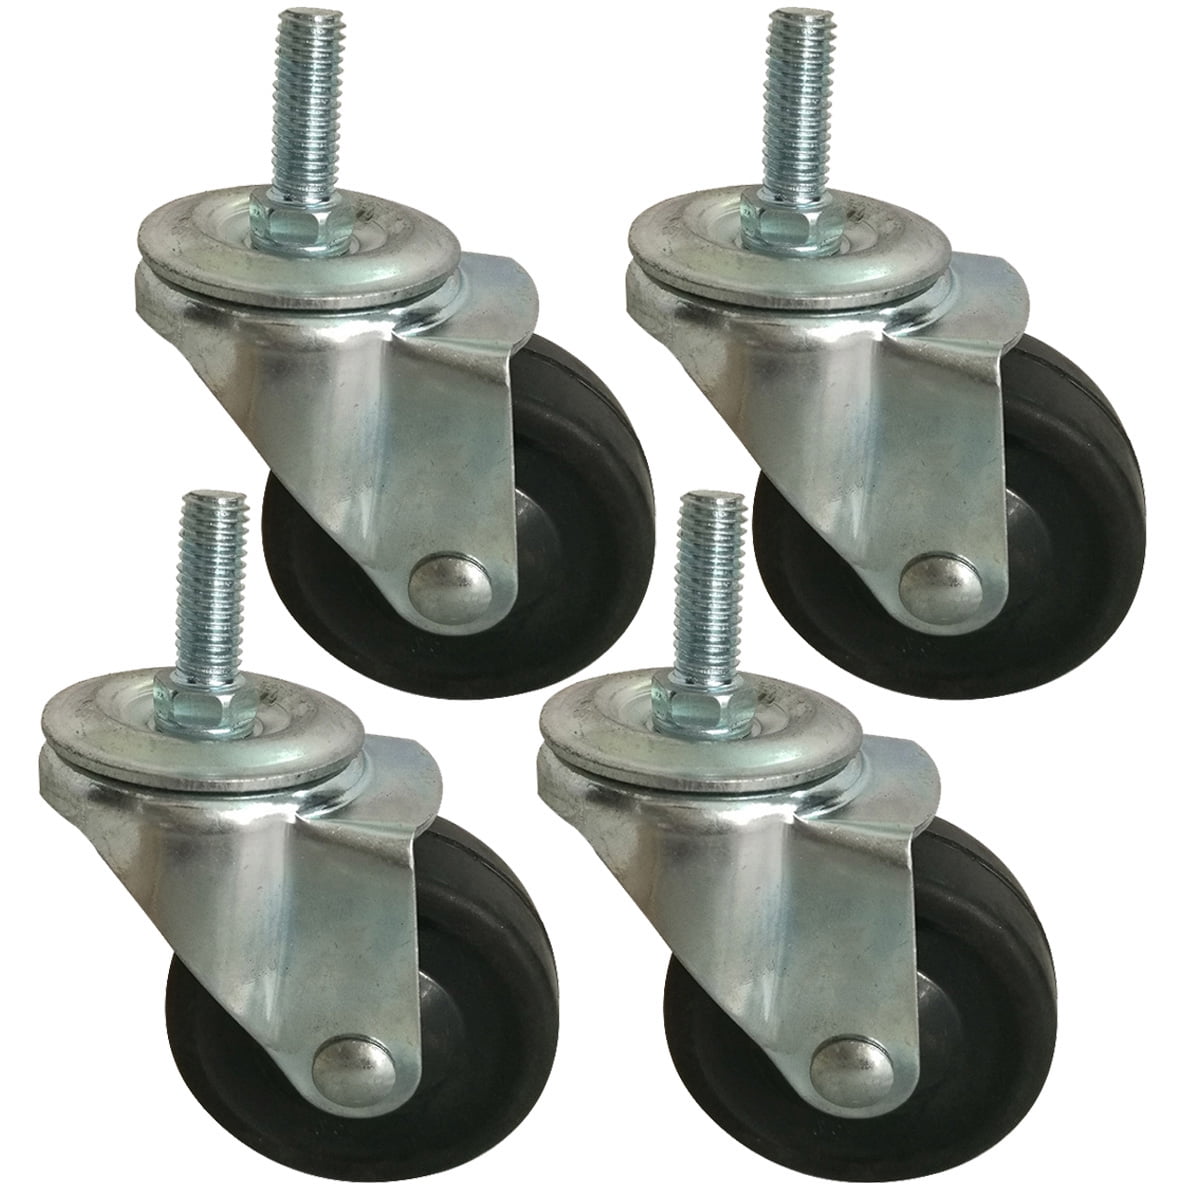 Shepherd 2-1/8 in Adjustable Rubber Bed Frame Casters with Soft Tread 2-Pack 